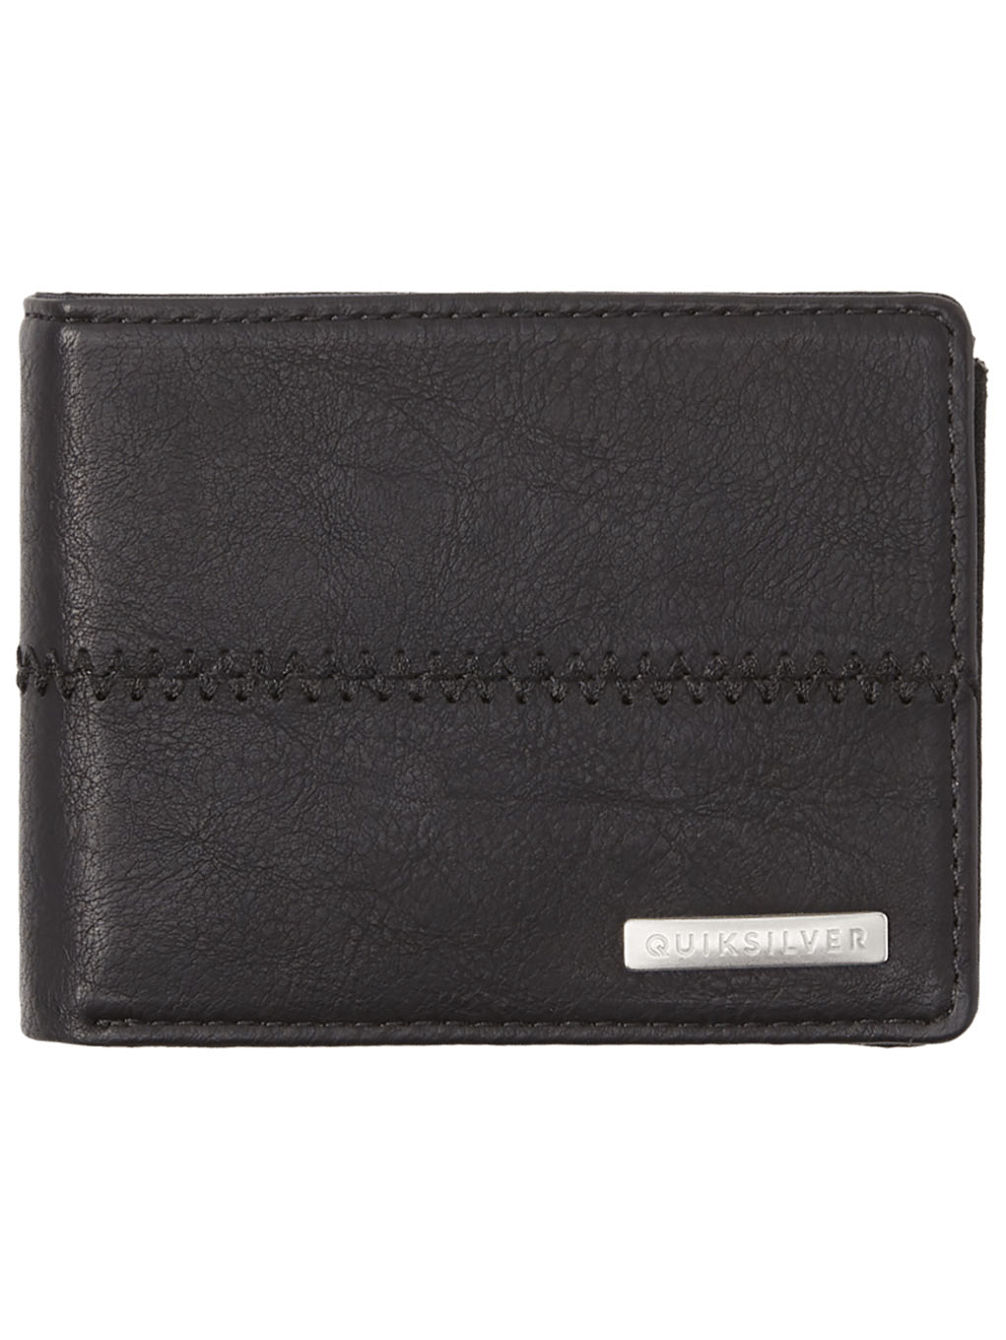 Stitchy 3 Wallet